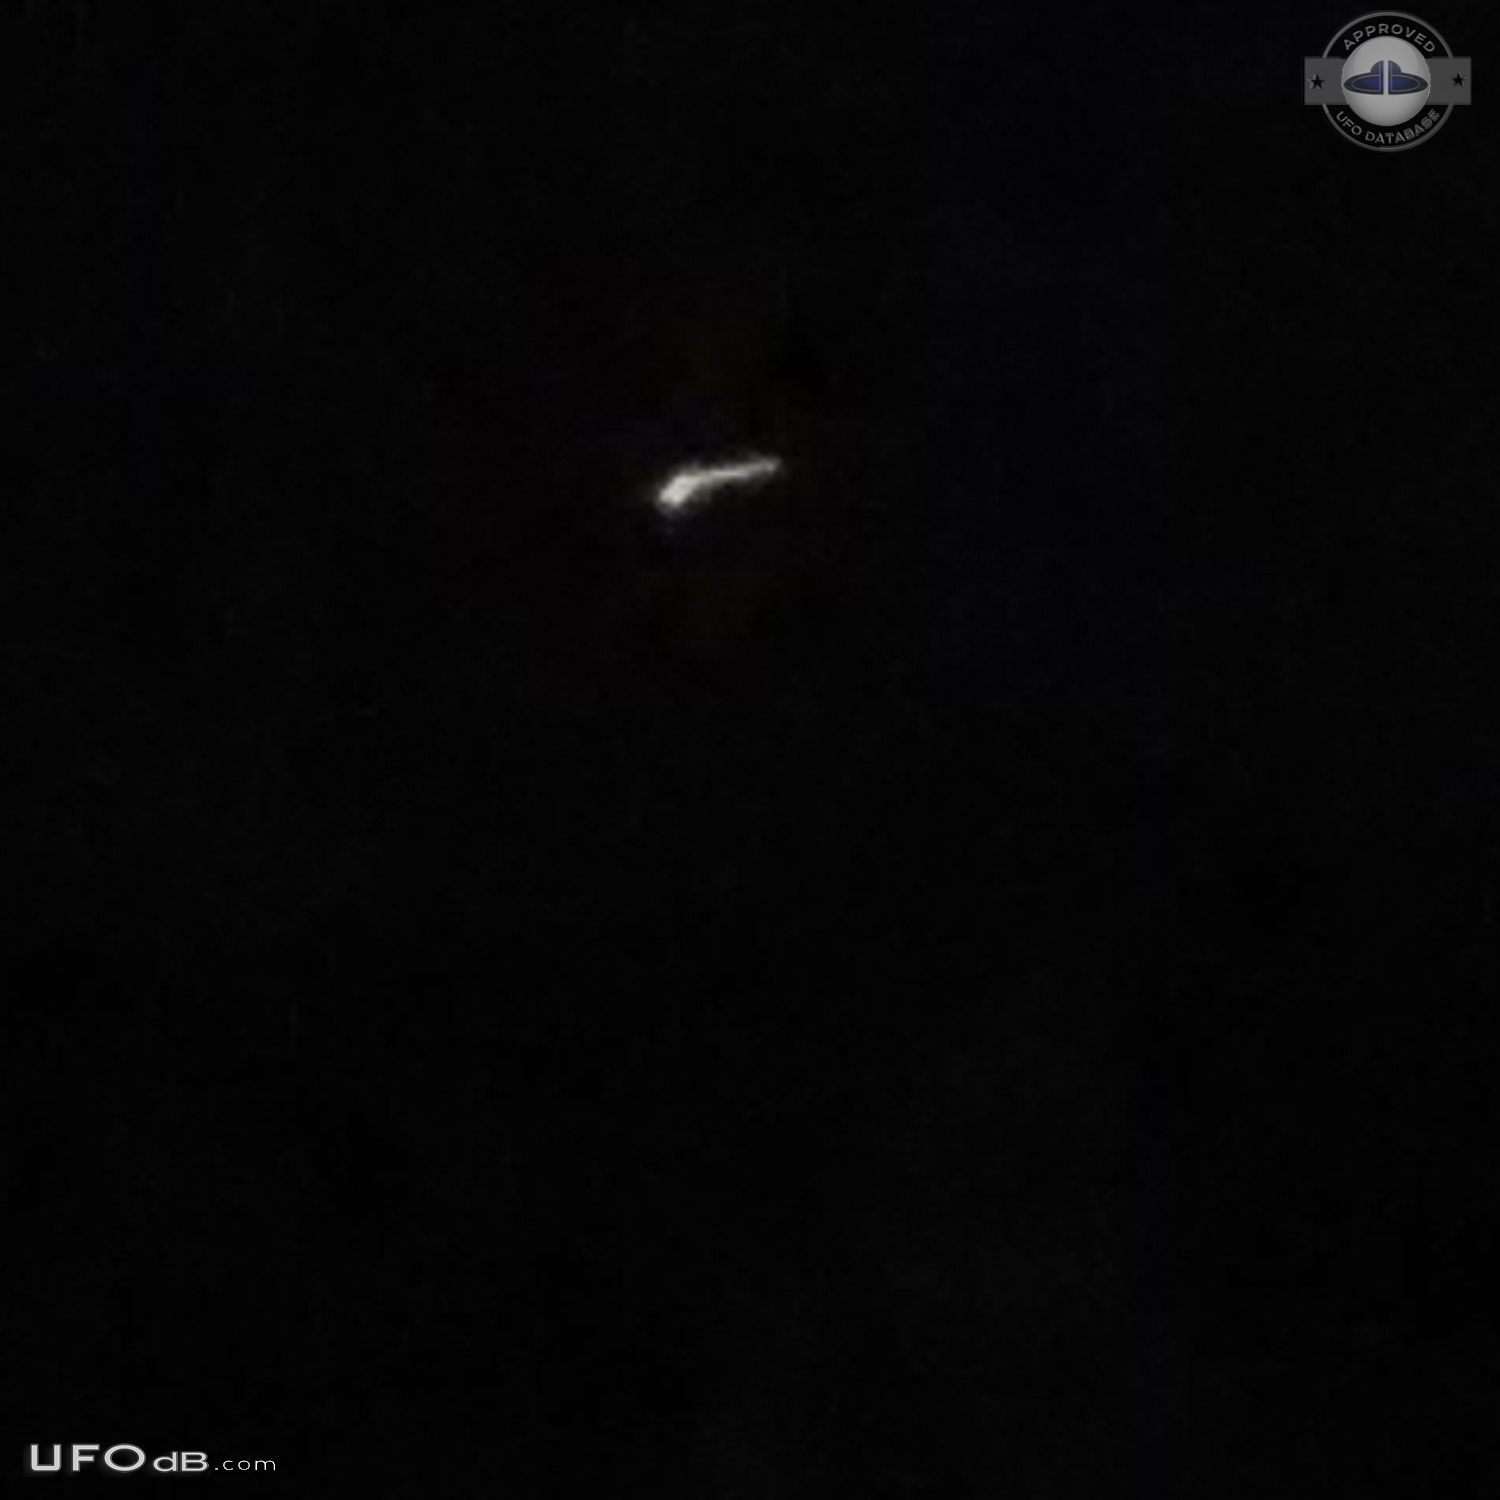 Looked like a star far, closer you could see it was UFO triangle with  UFO Picture #724-3